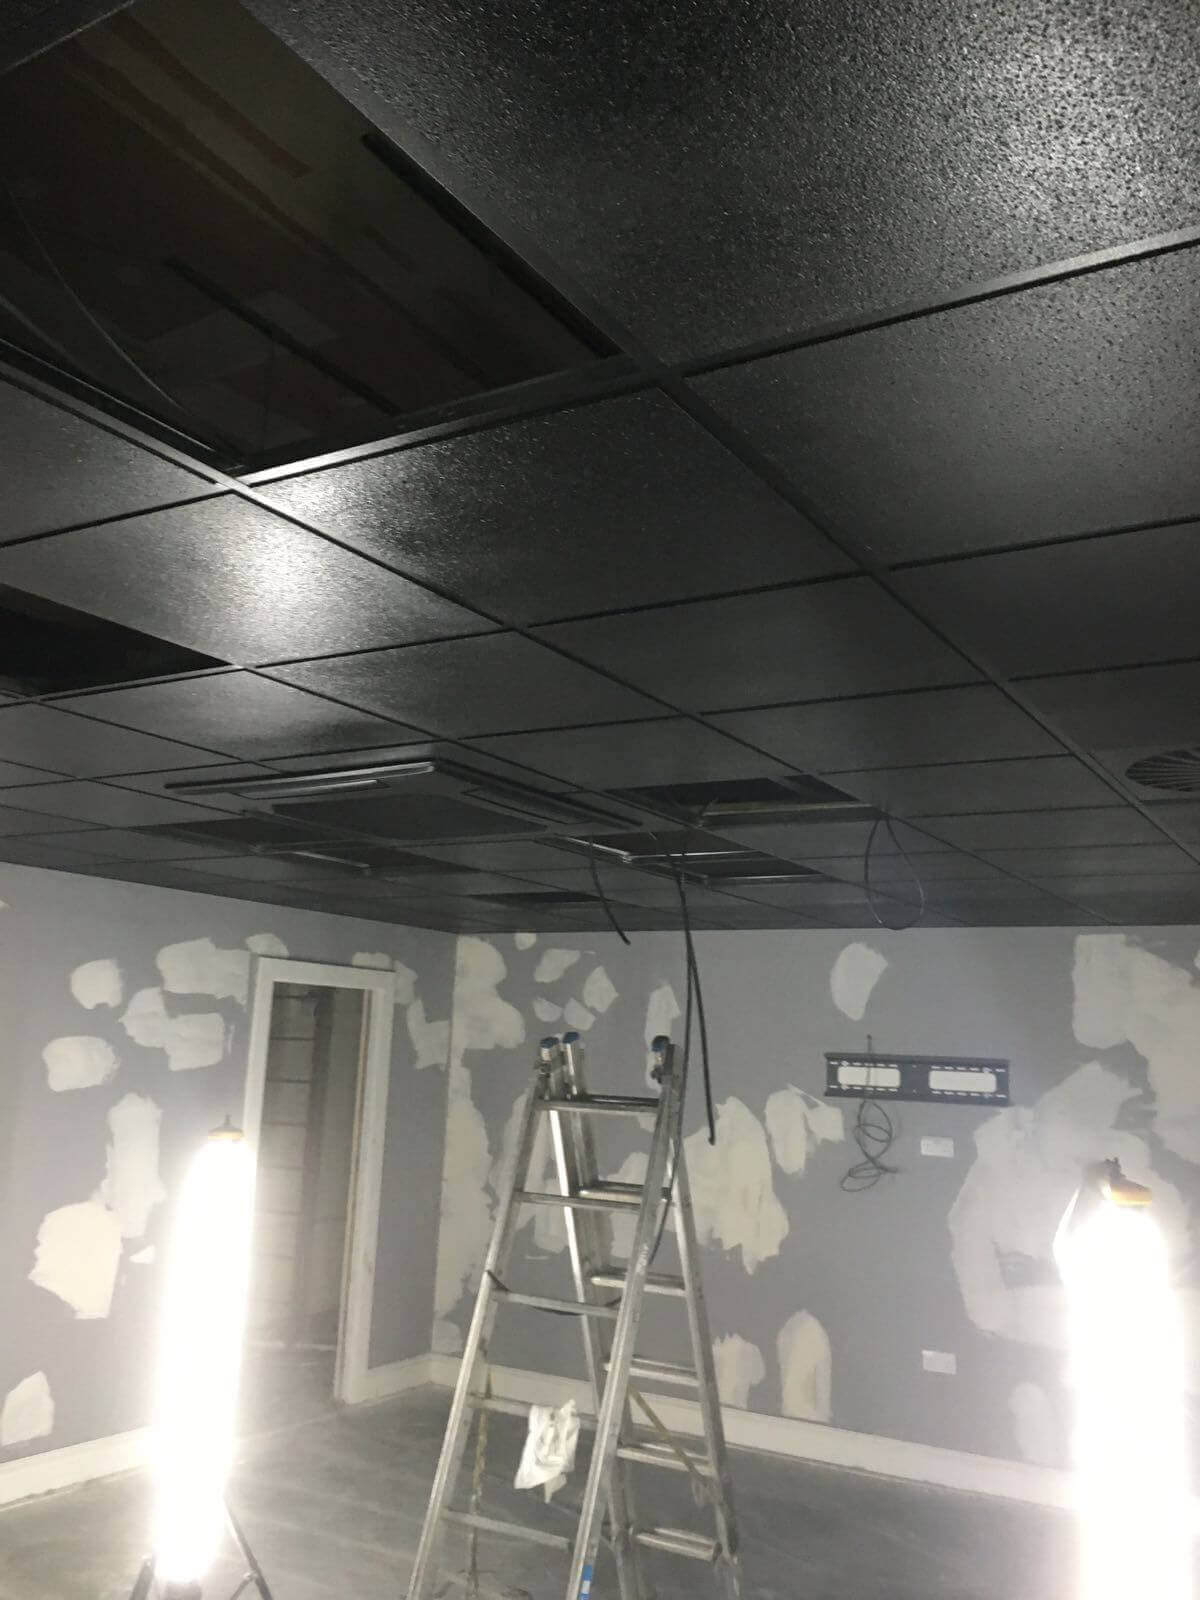 Ceilings and Track Re-coating Luton, Bedfordshire